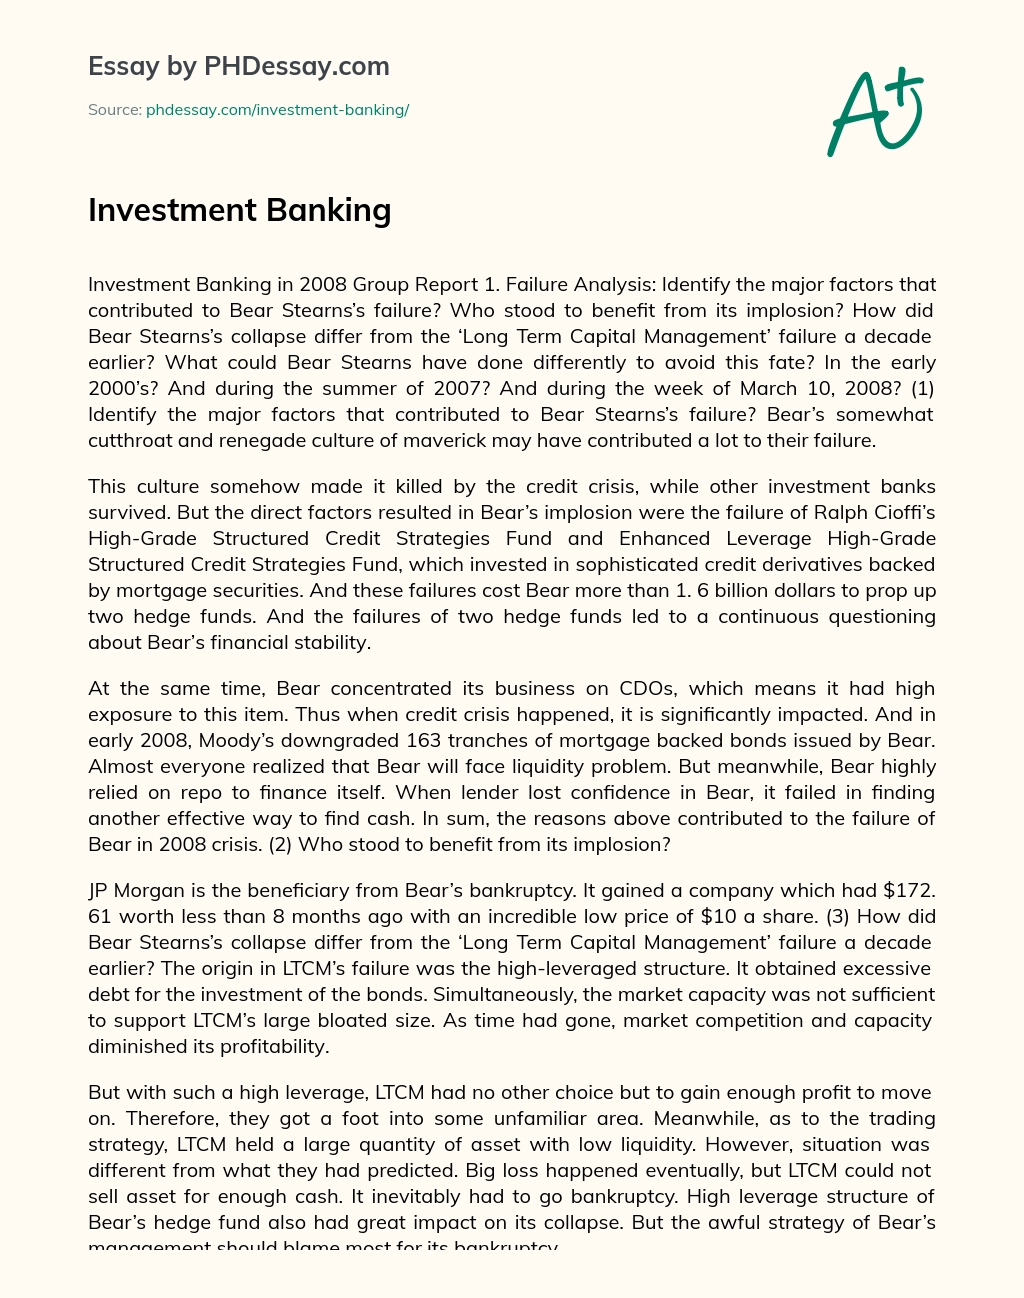 Investment Banking essay